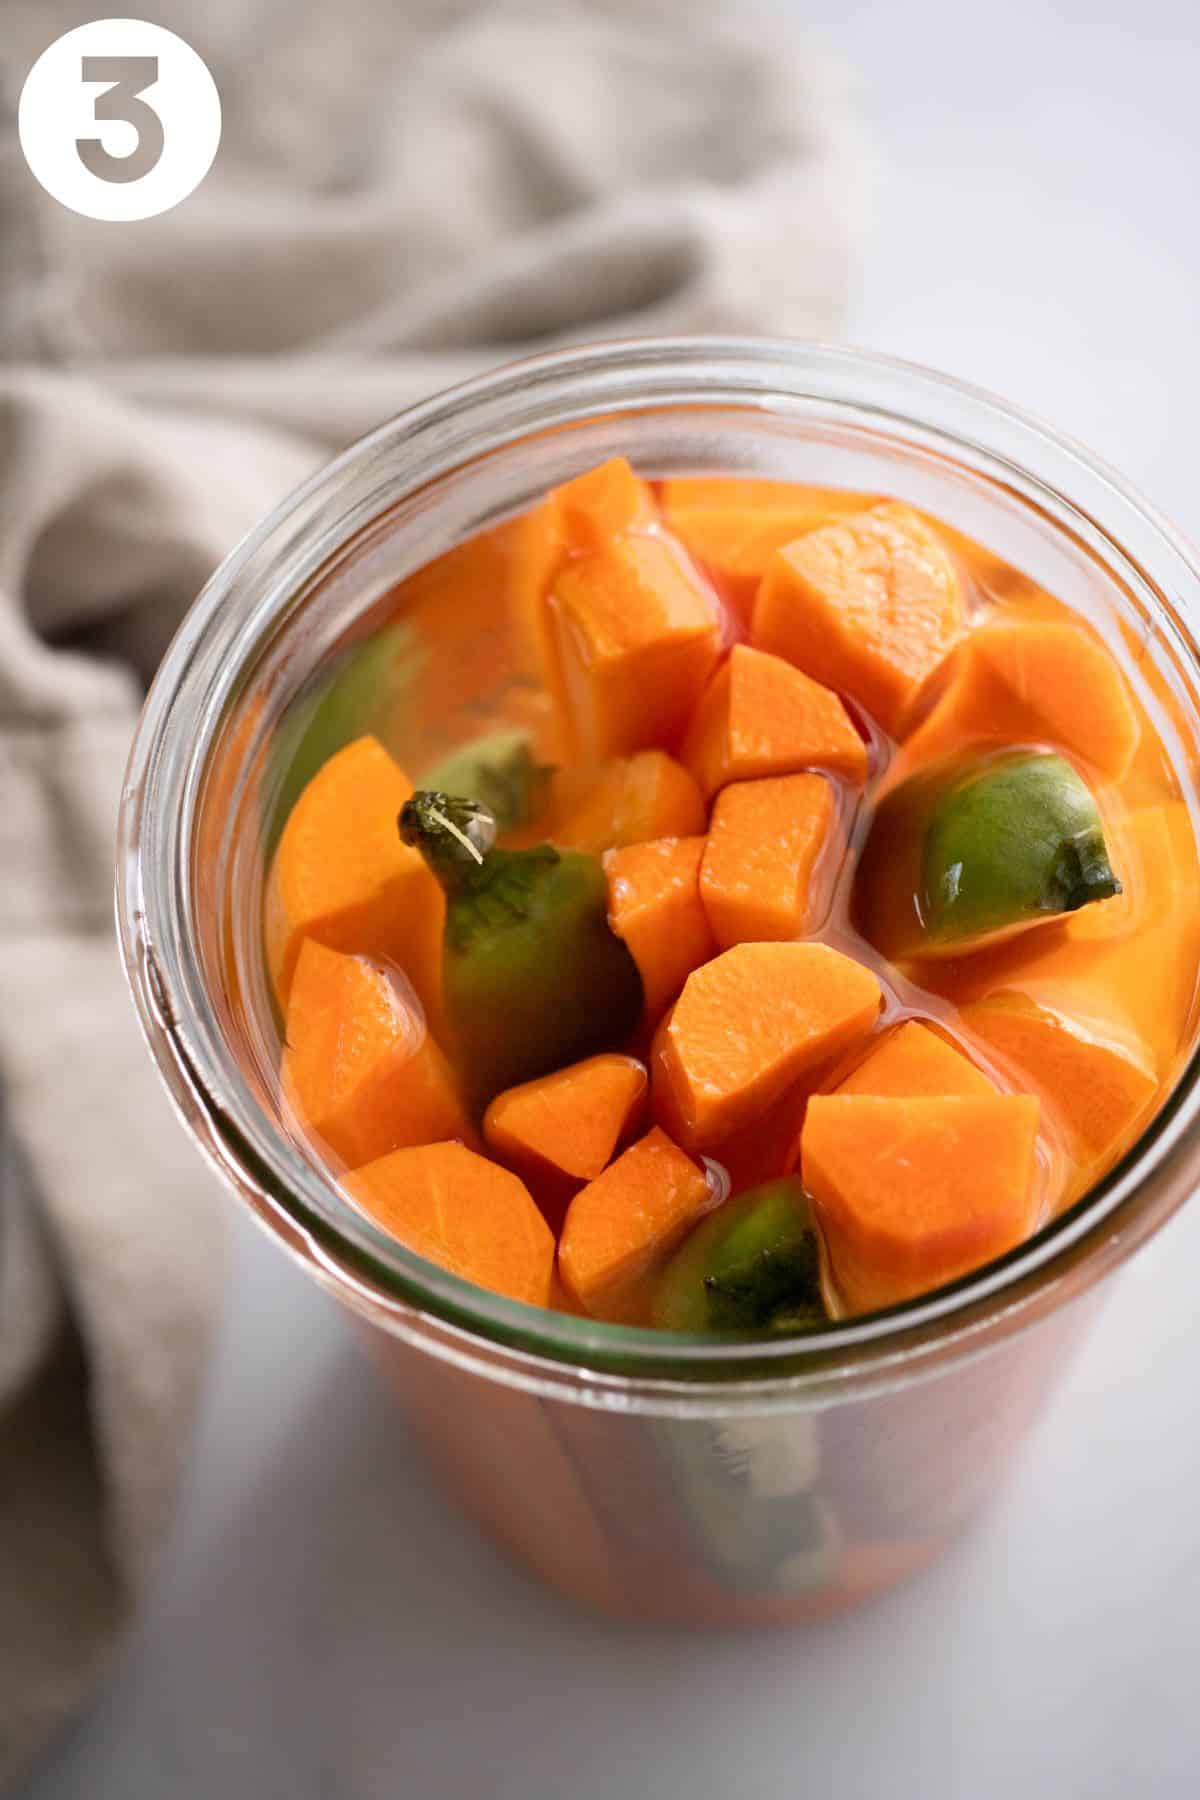 Looking into a jar of quick pickled carrots soaking in brine with jalapeño pepper. Labeled with a 